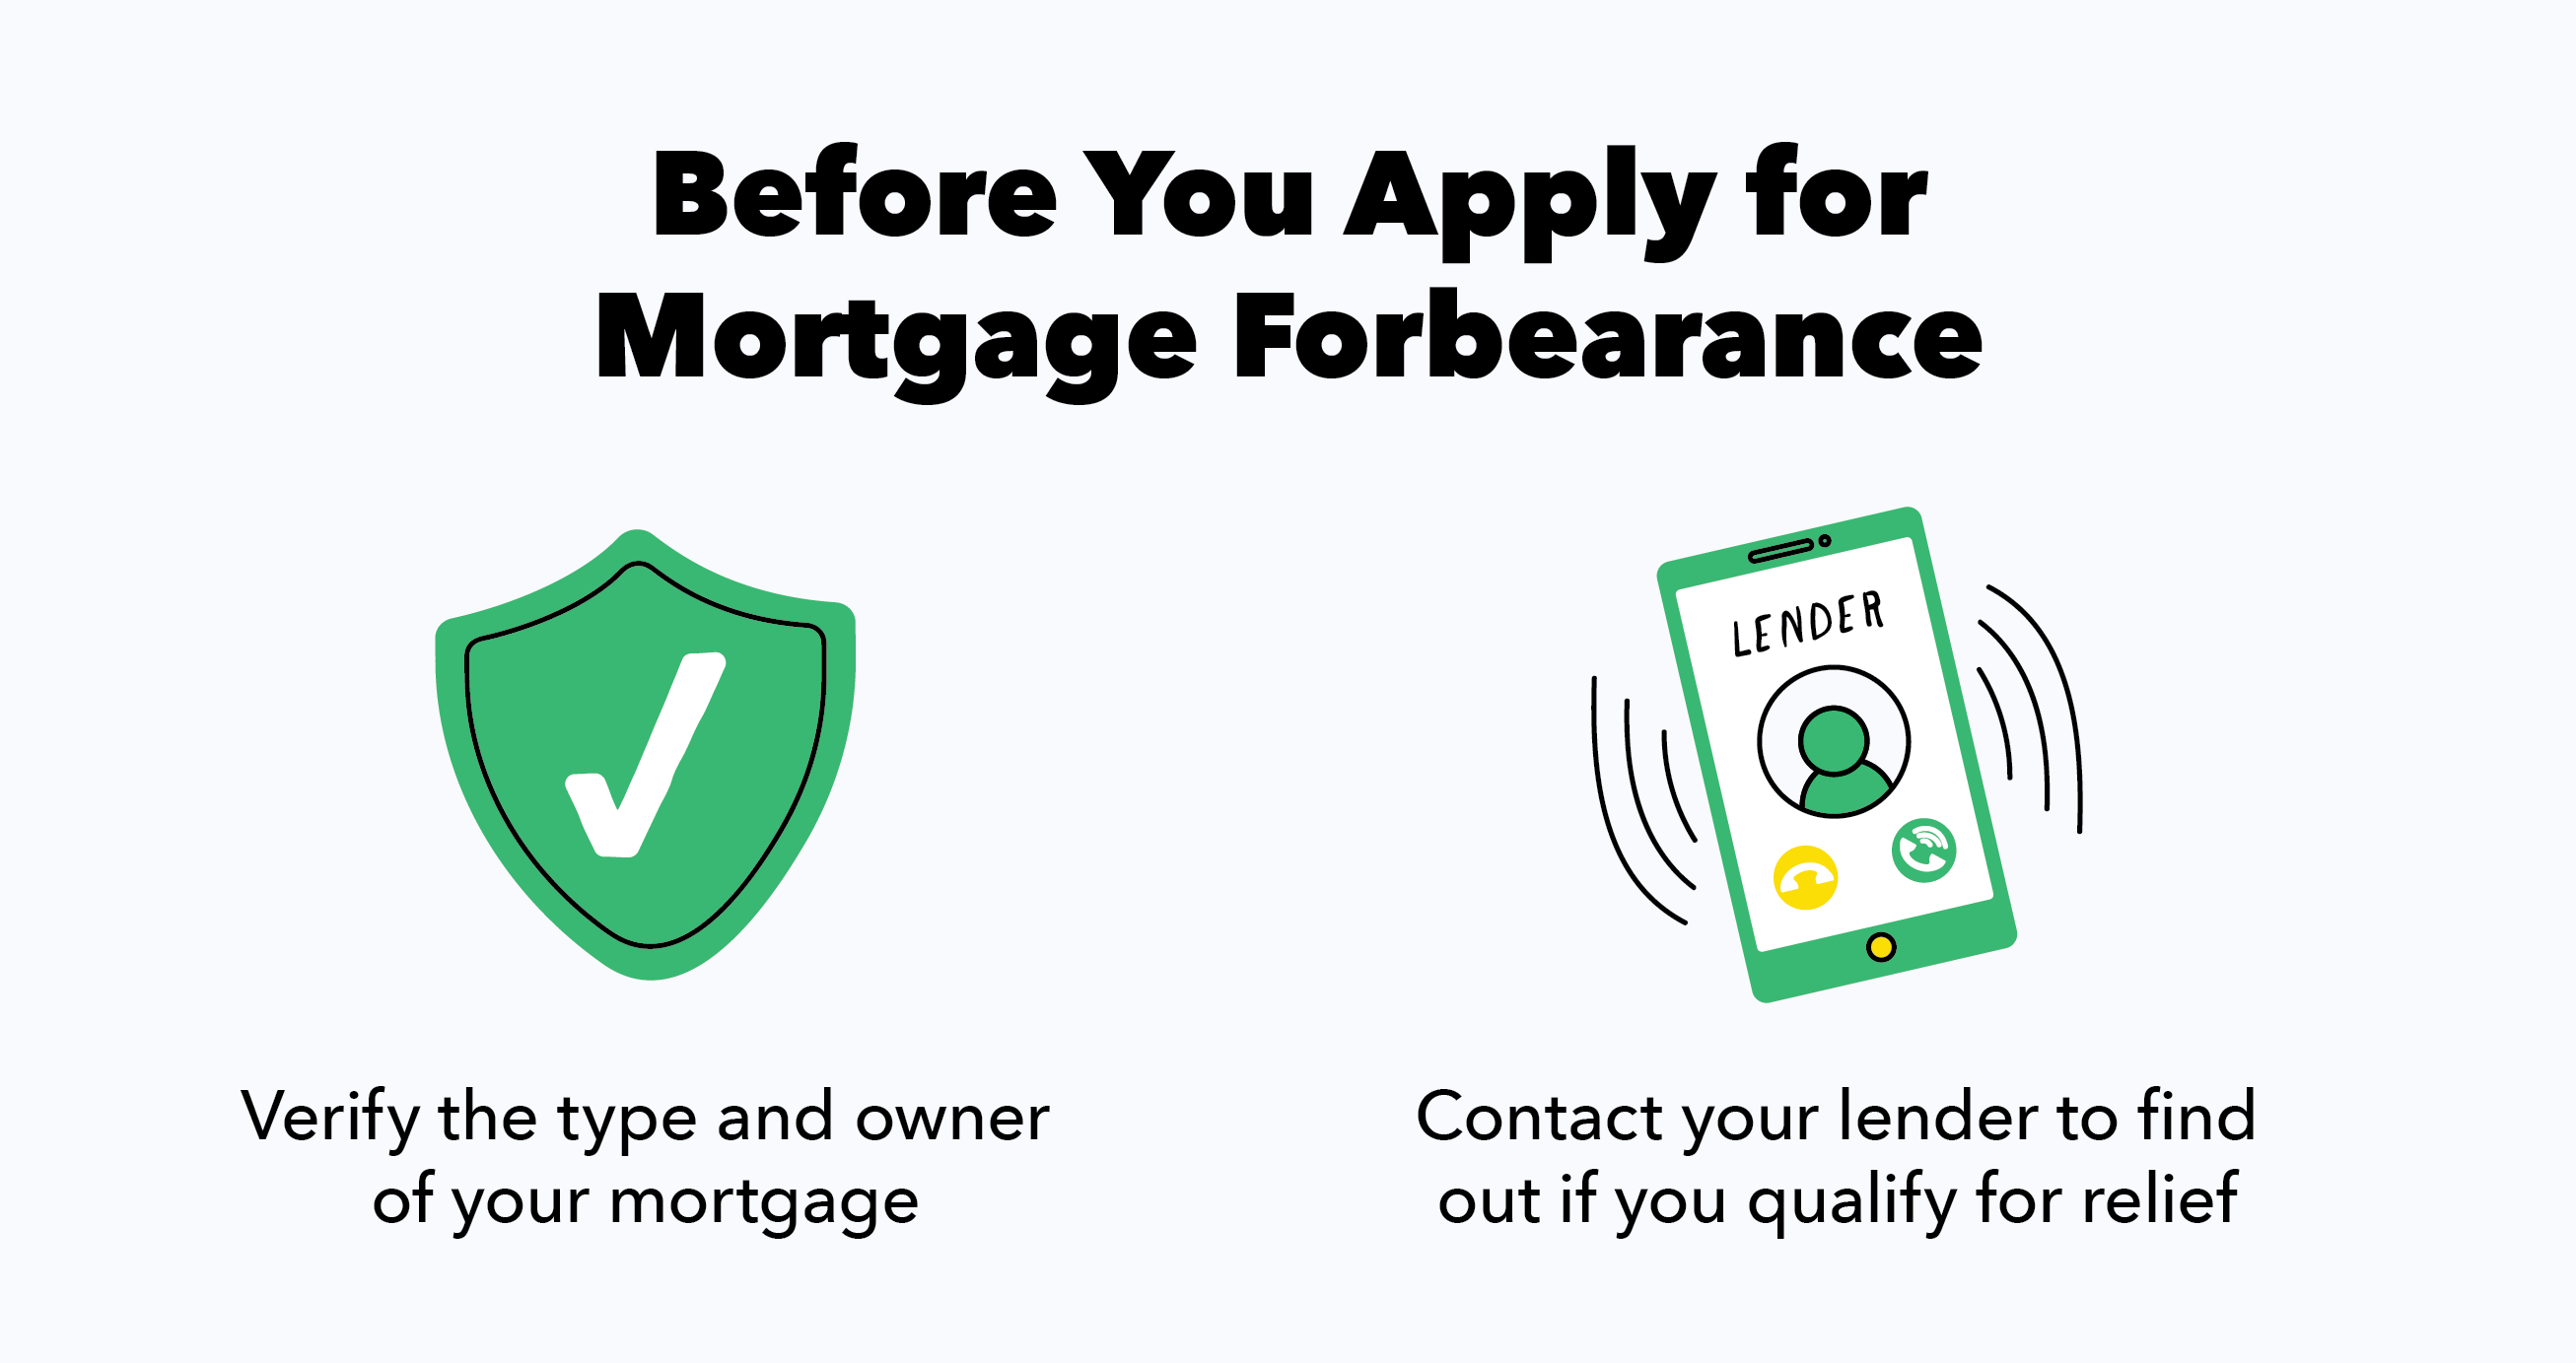 Check your mortgage and contact your lender before you make an application